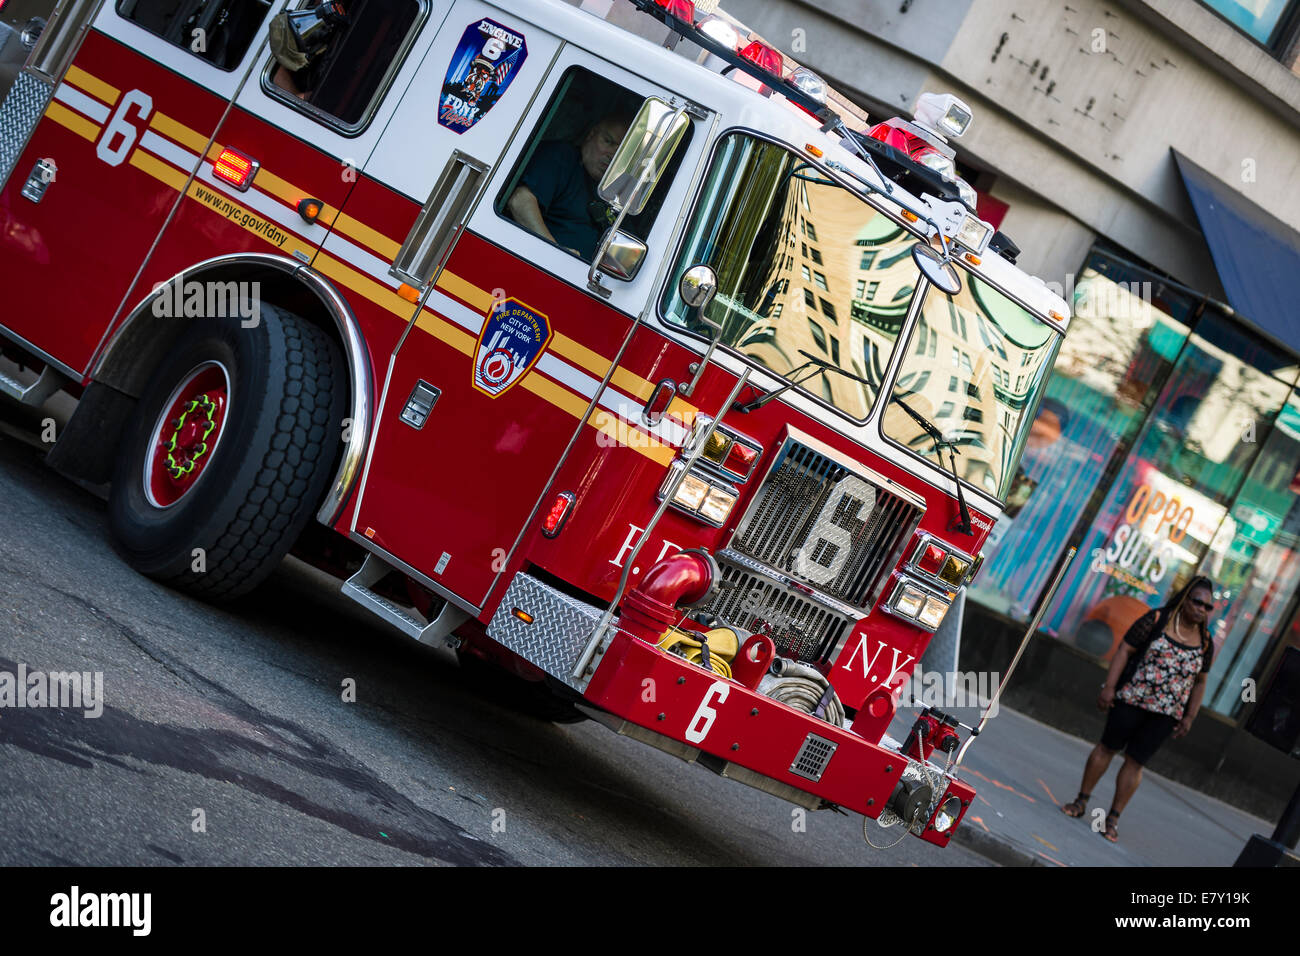 A New York Fire Department Engine answering an emergency call in Midtown New York. Stock Photo